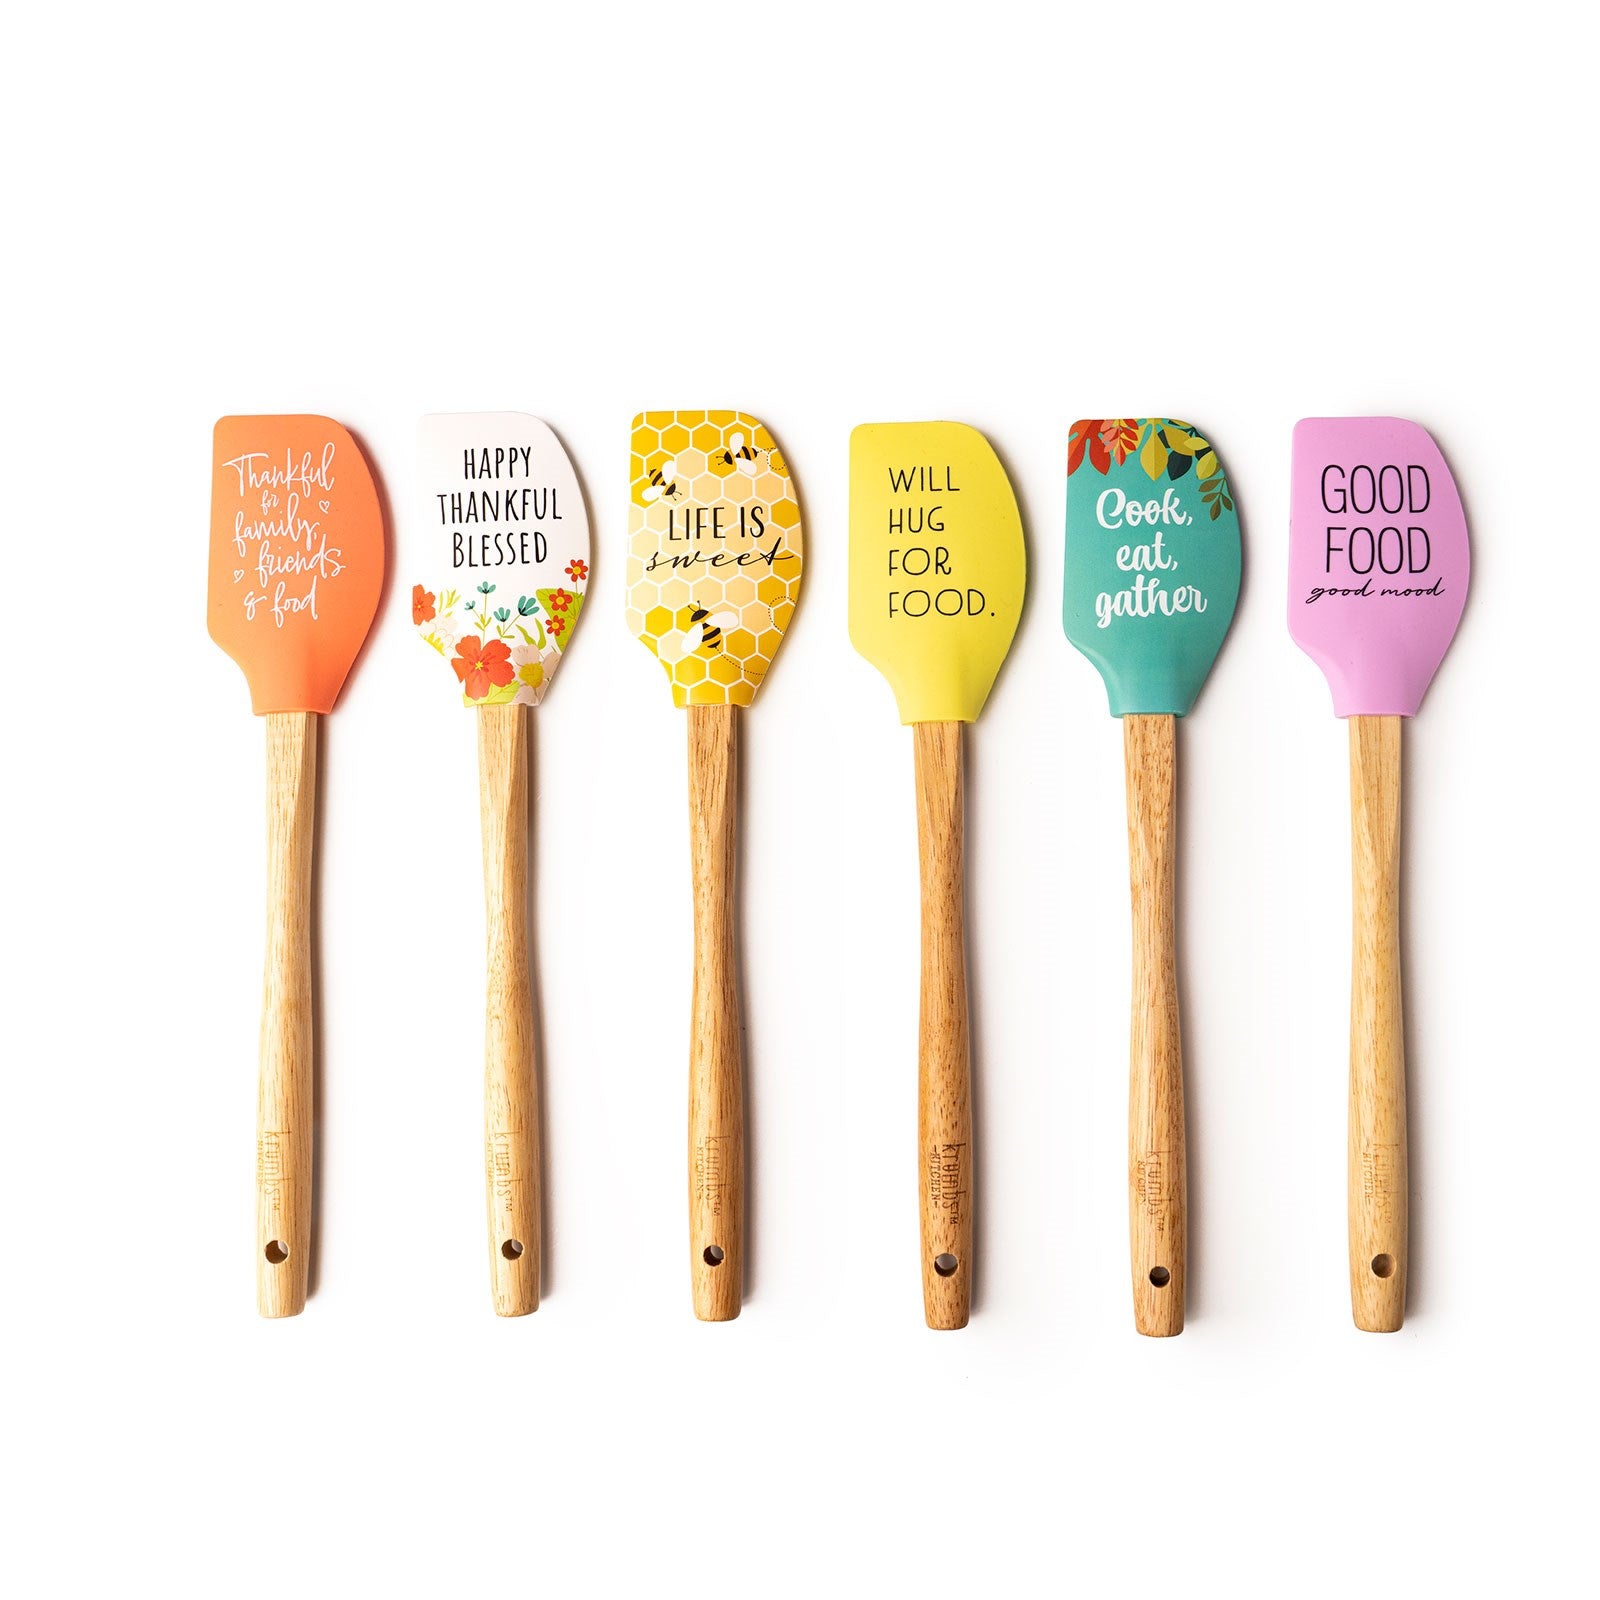 One Krumbs Kitchen Metallic Gold Handle Silicone Spoon - SHIPS ASSORTED